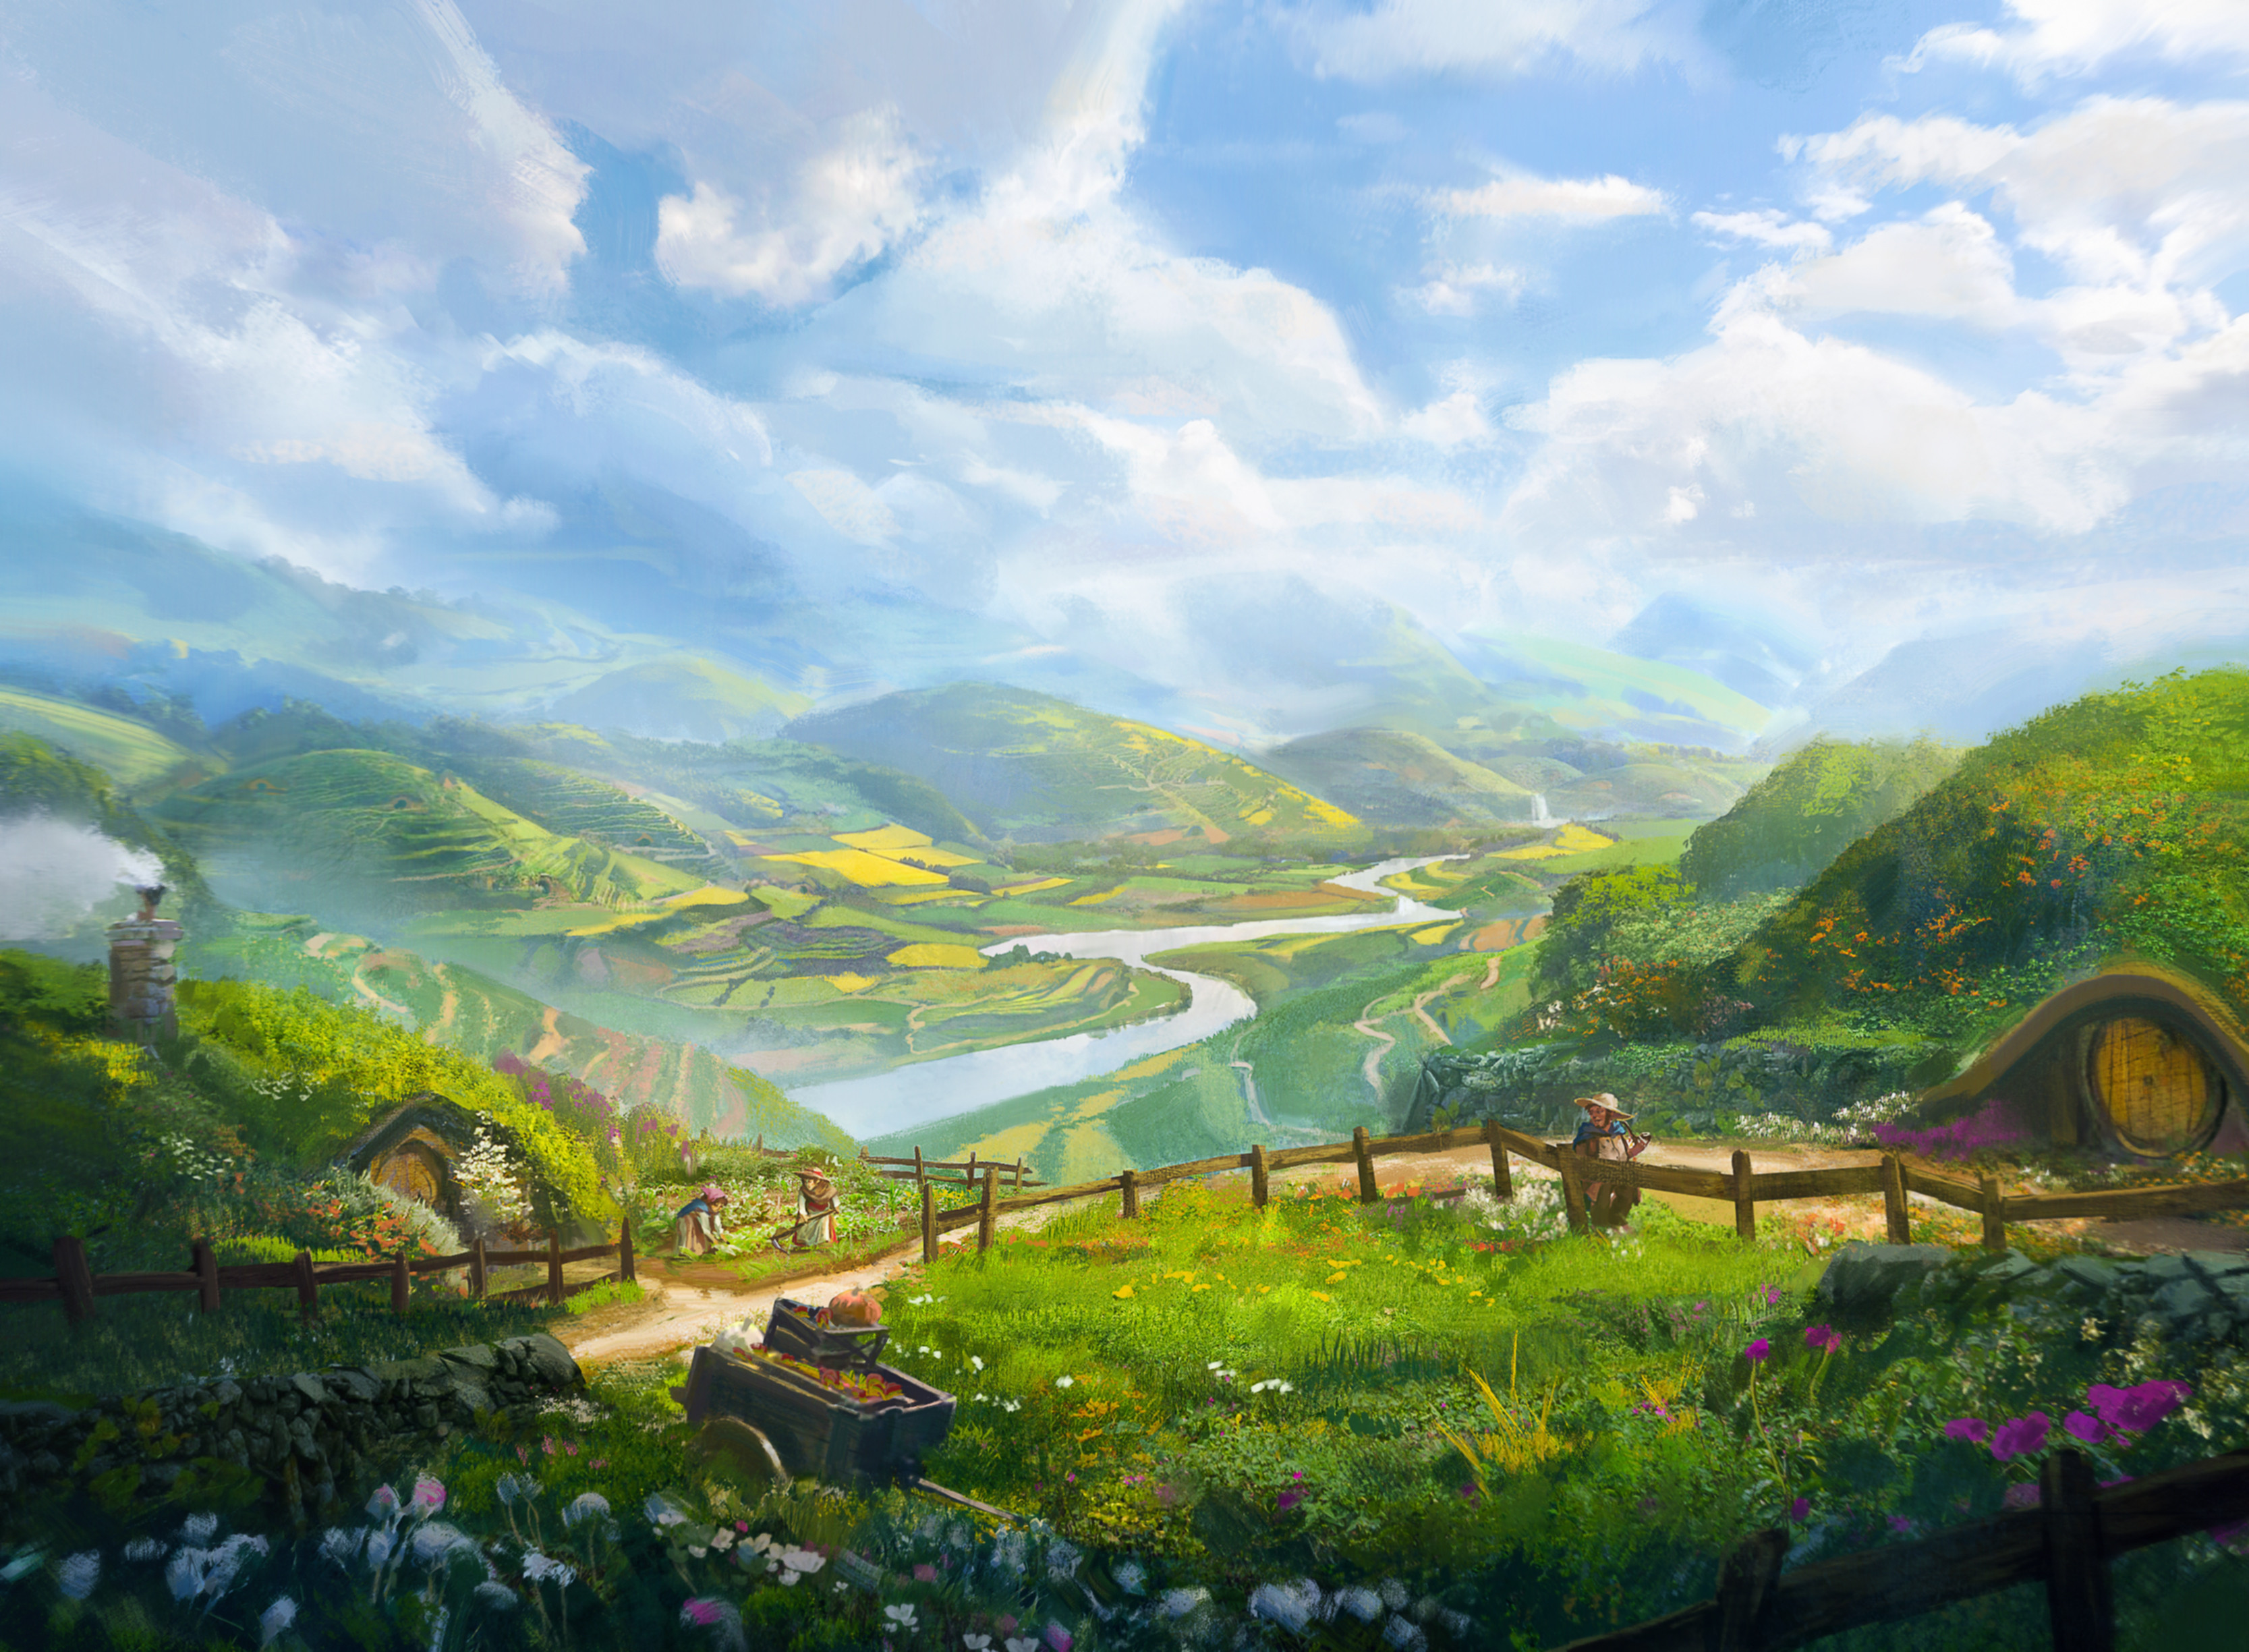 Artwork Digital Art River Nature Mountains The Shire The Lord Of The Rings Clouds Hobbits Sky Landsc 3334x2449